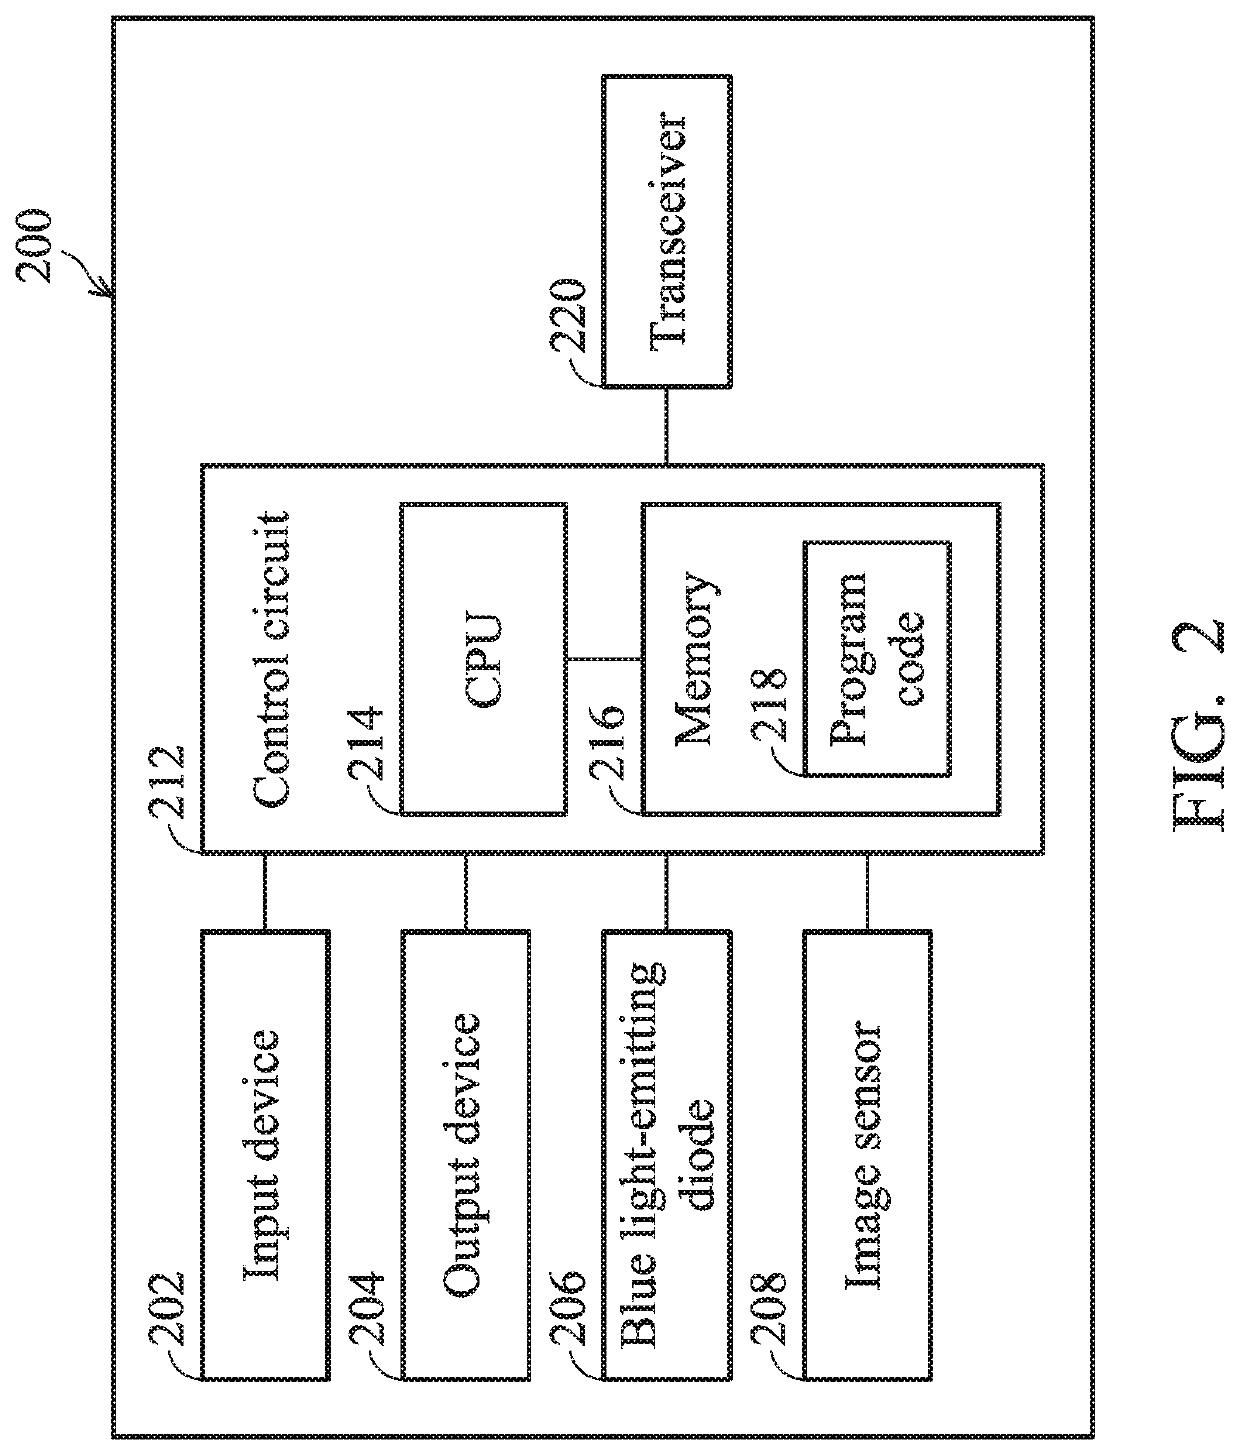 Method and device for distinguishing plaque and calculus